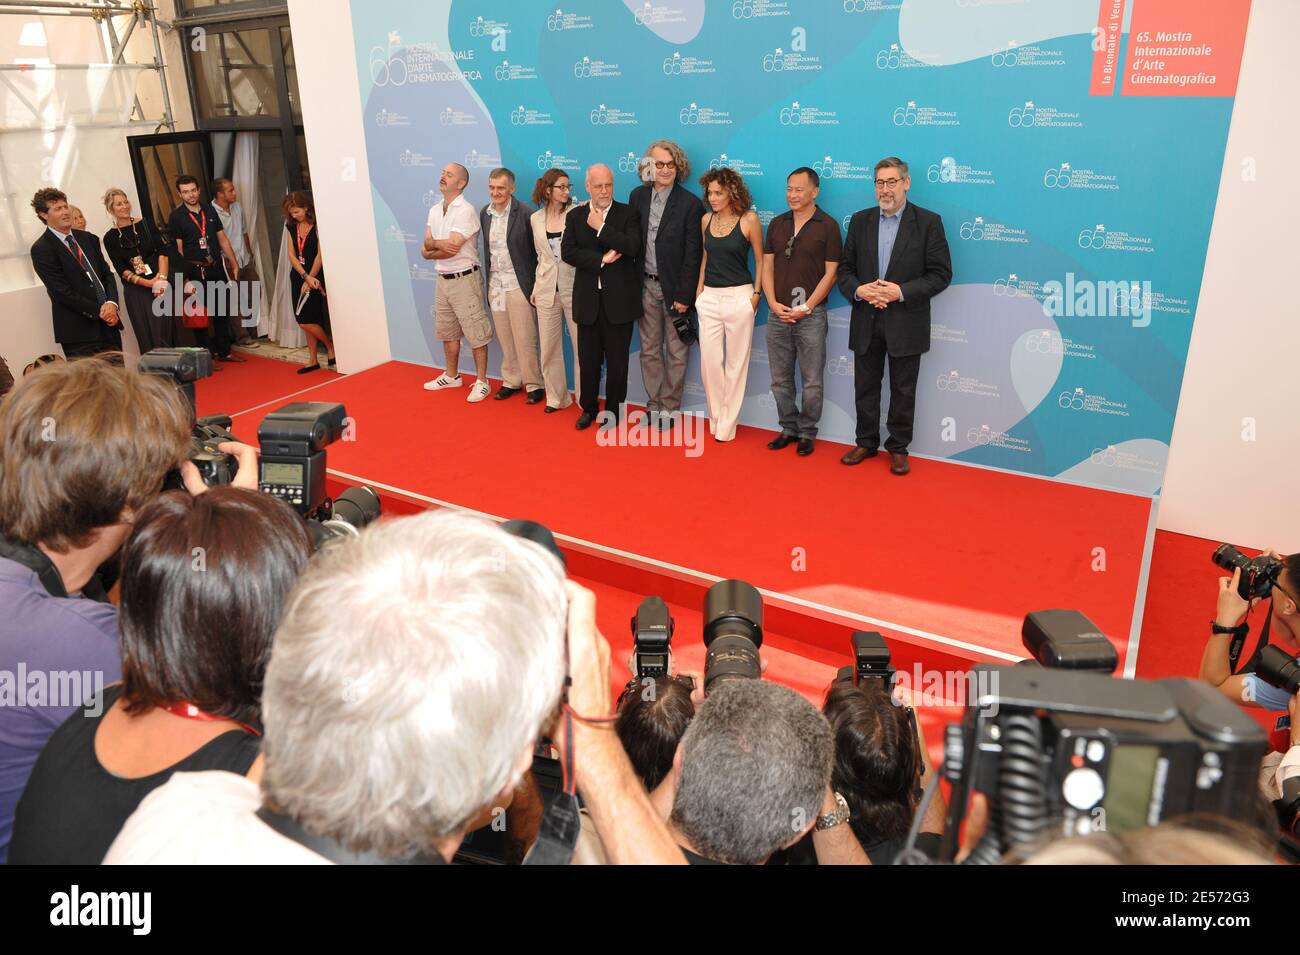 Director of the Festival Marco Muller (4th L) poses with Jury Members of the 65th Mostra Venice International Film Festival, (L-R) Douglas Gordon, Yuri Arabov, Lucrecia Martel, president Wim Wenders, Valeria Golino, Johnnie To and John Landis at a photocall at Venice Lido, Italy on August 27, 2008, ahead of the opening ceremony to be held this evening. Photo by Thierry Orban/ABACAPRESS/COM Stock Photo